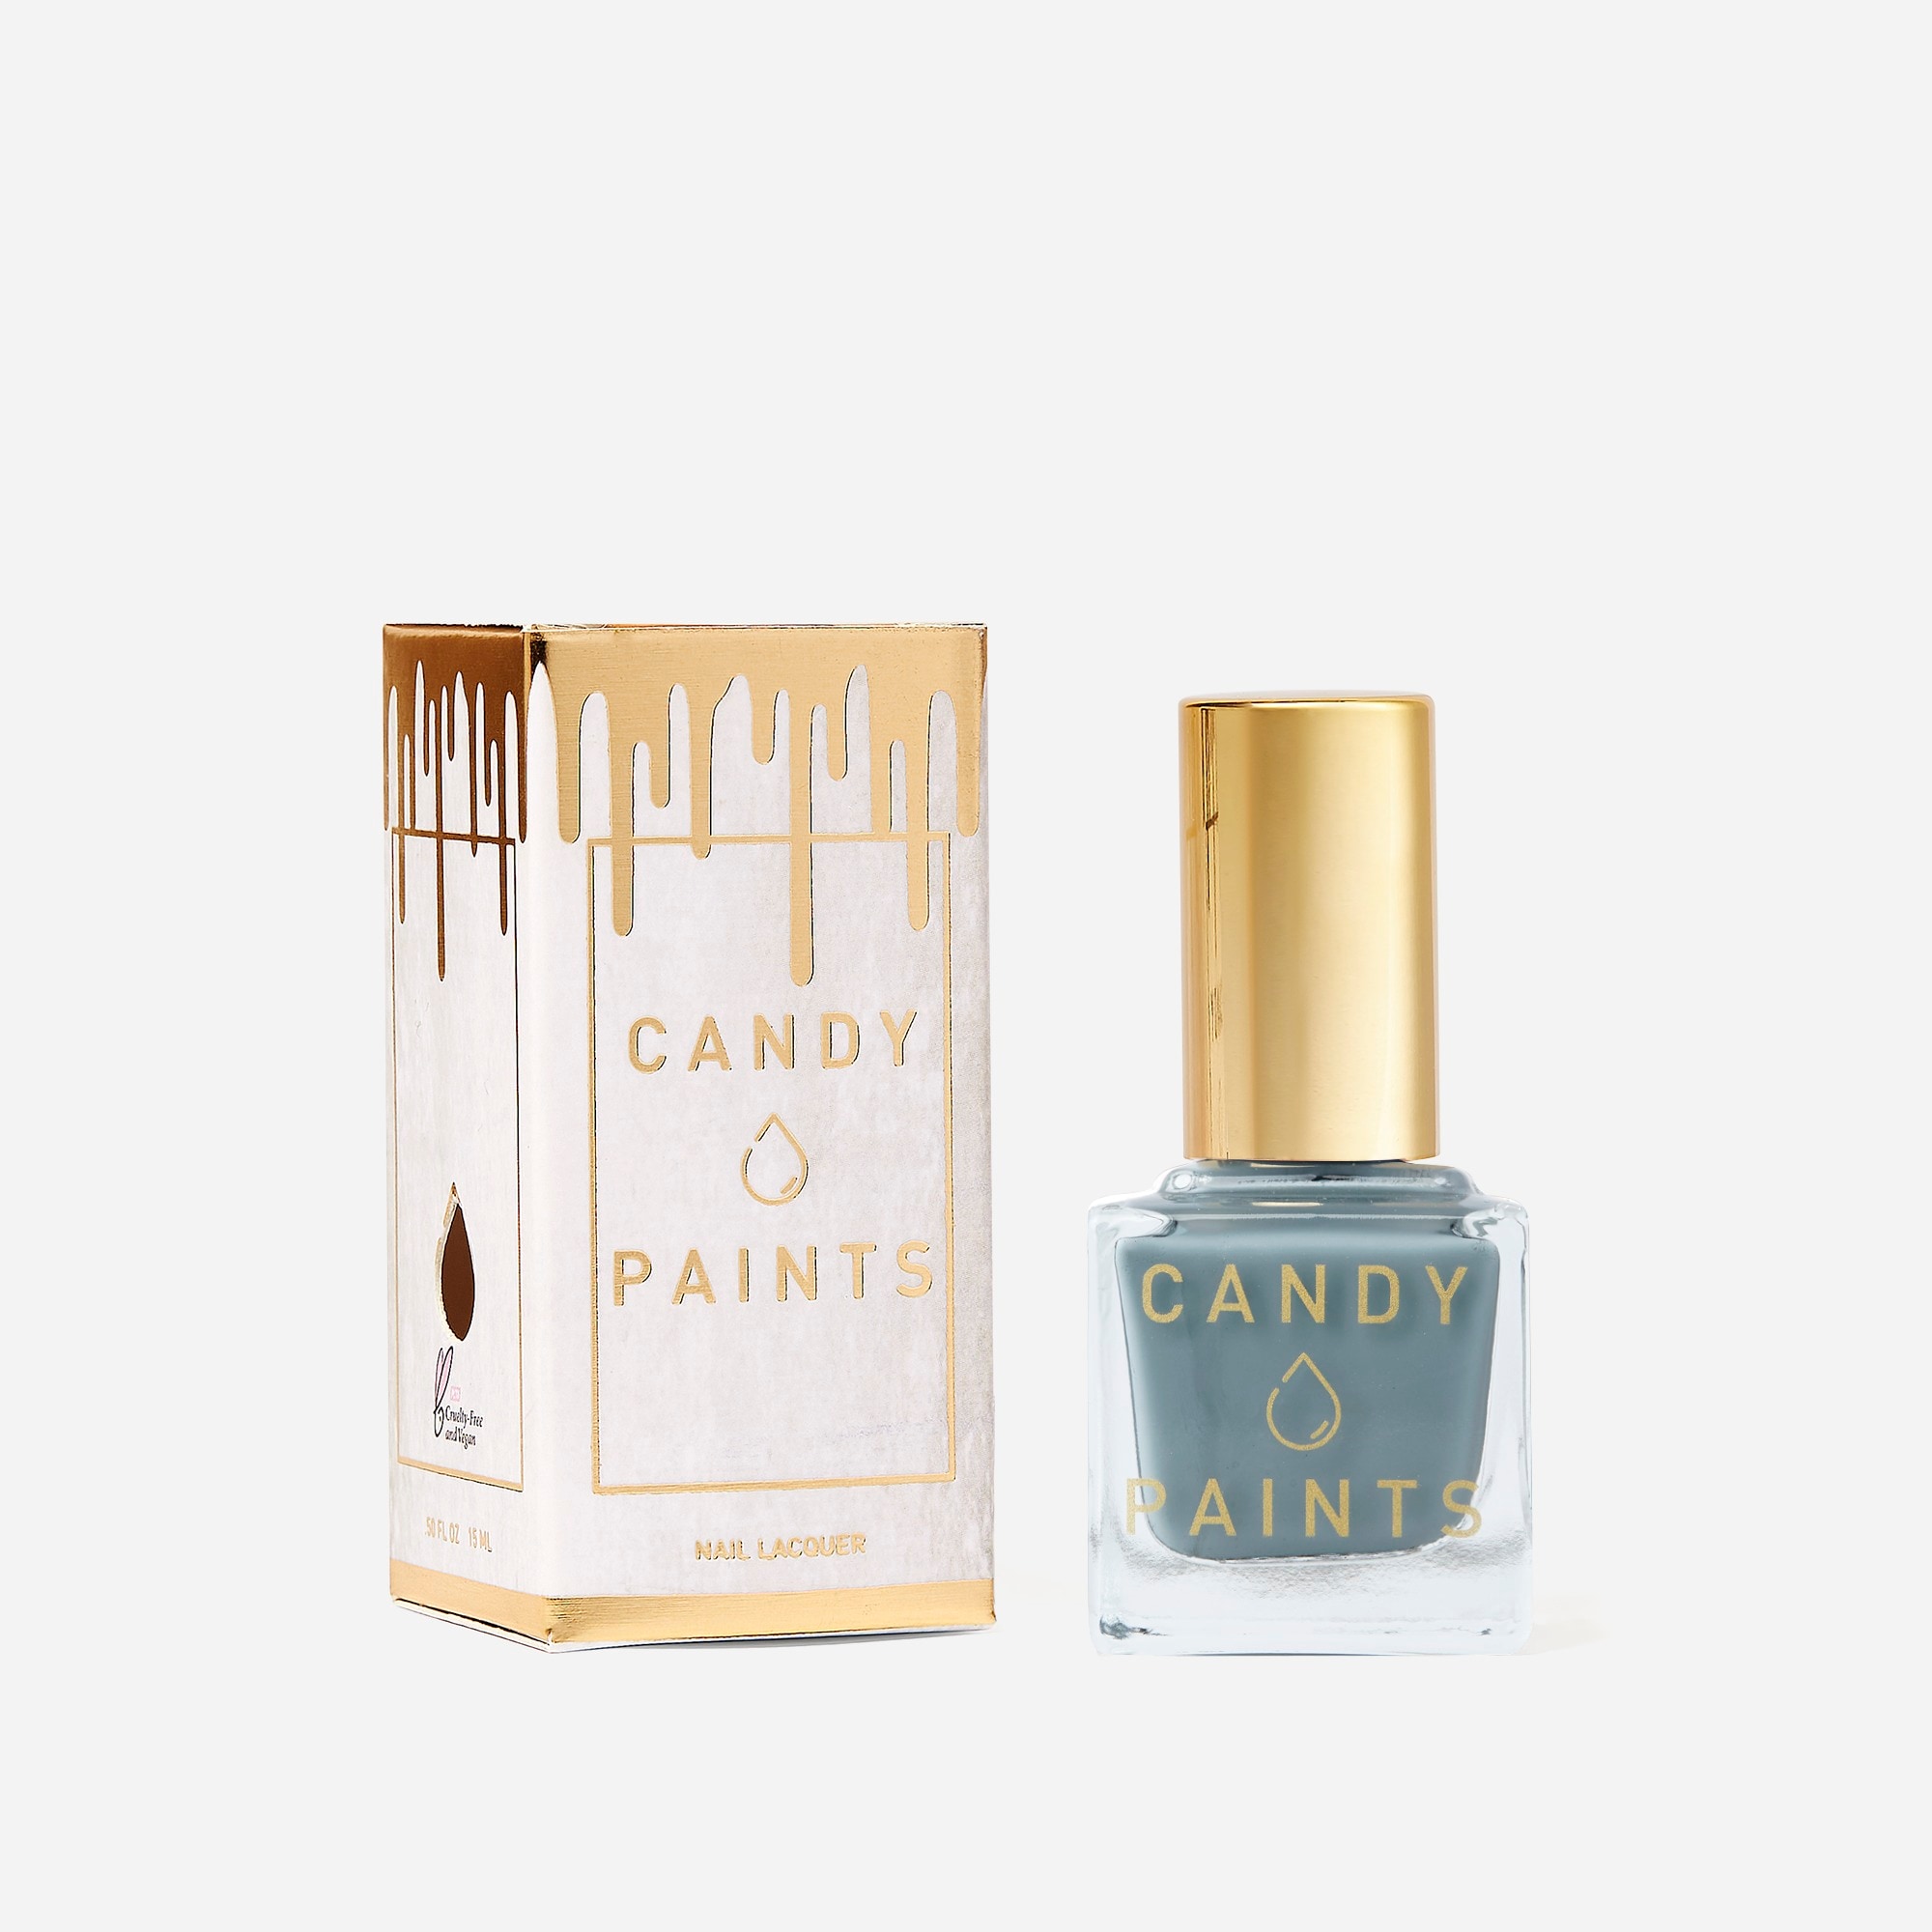  CANDY X PAINTS Grady Baby nail lacquer